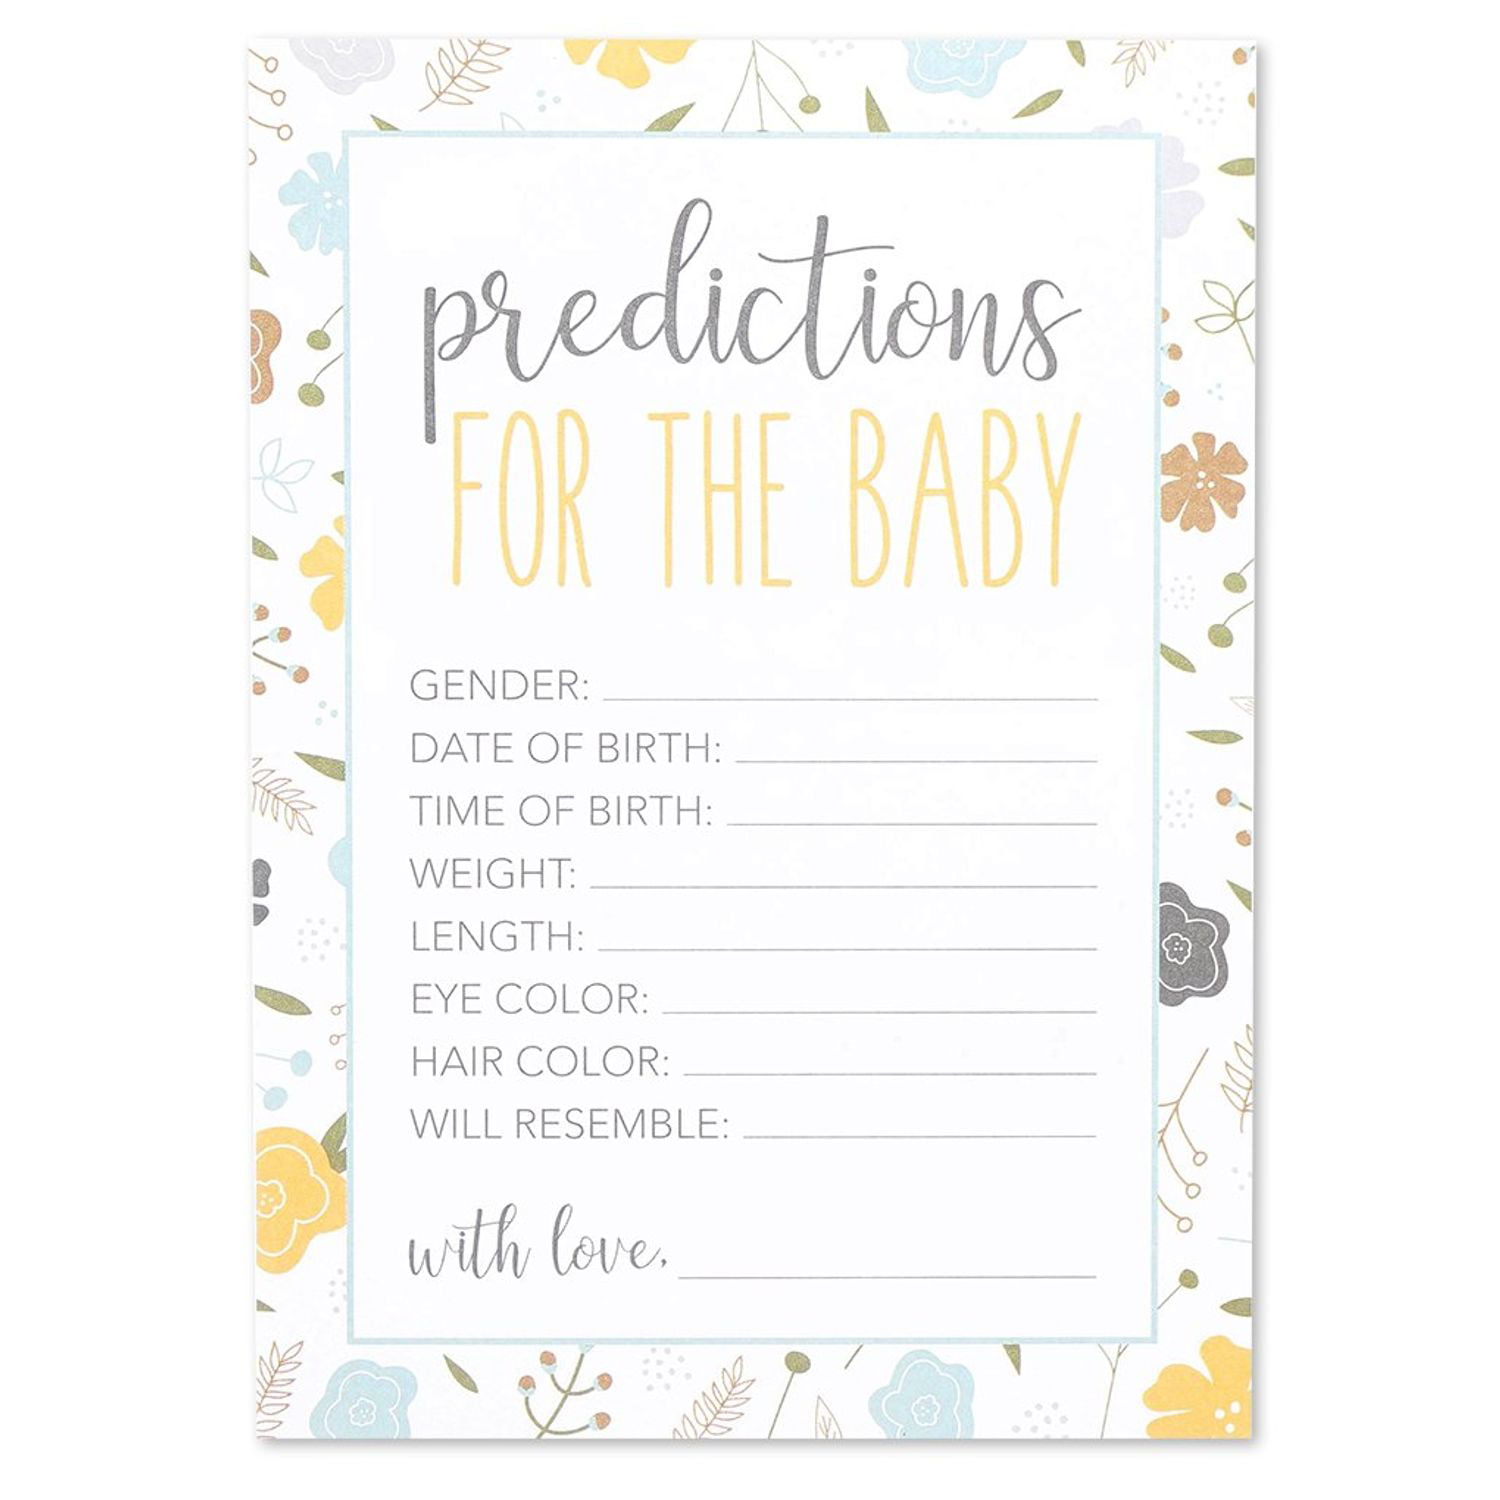 50 Sheets Baby Shower Predictions for the Baby Party Games for Boy or Girl Unisex Gender Neutral 5 x 7 Inches Best Paper Greetings for 50 Guest Activities Supplies